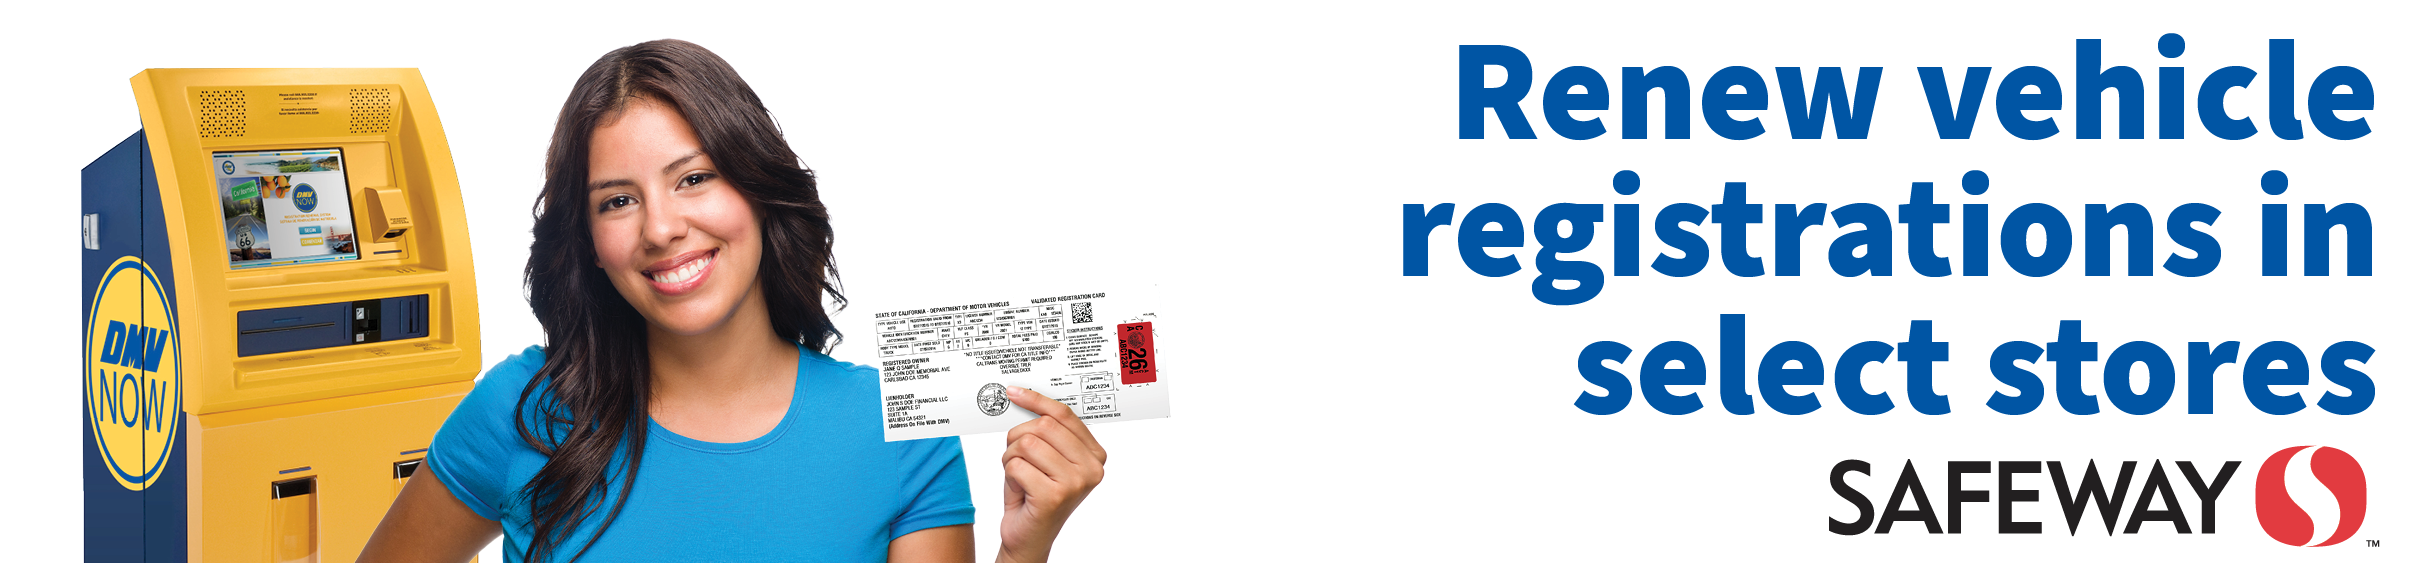 Renew vehicle registrations in select Safeway stores